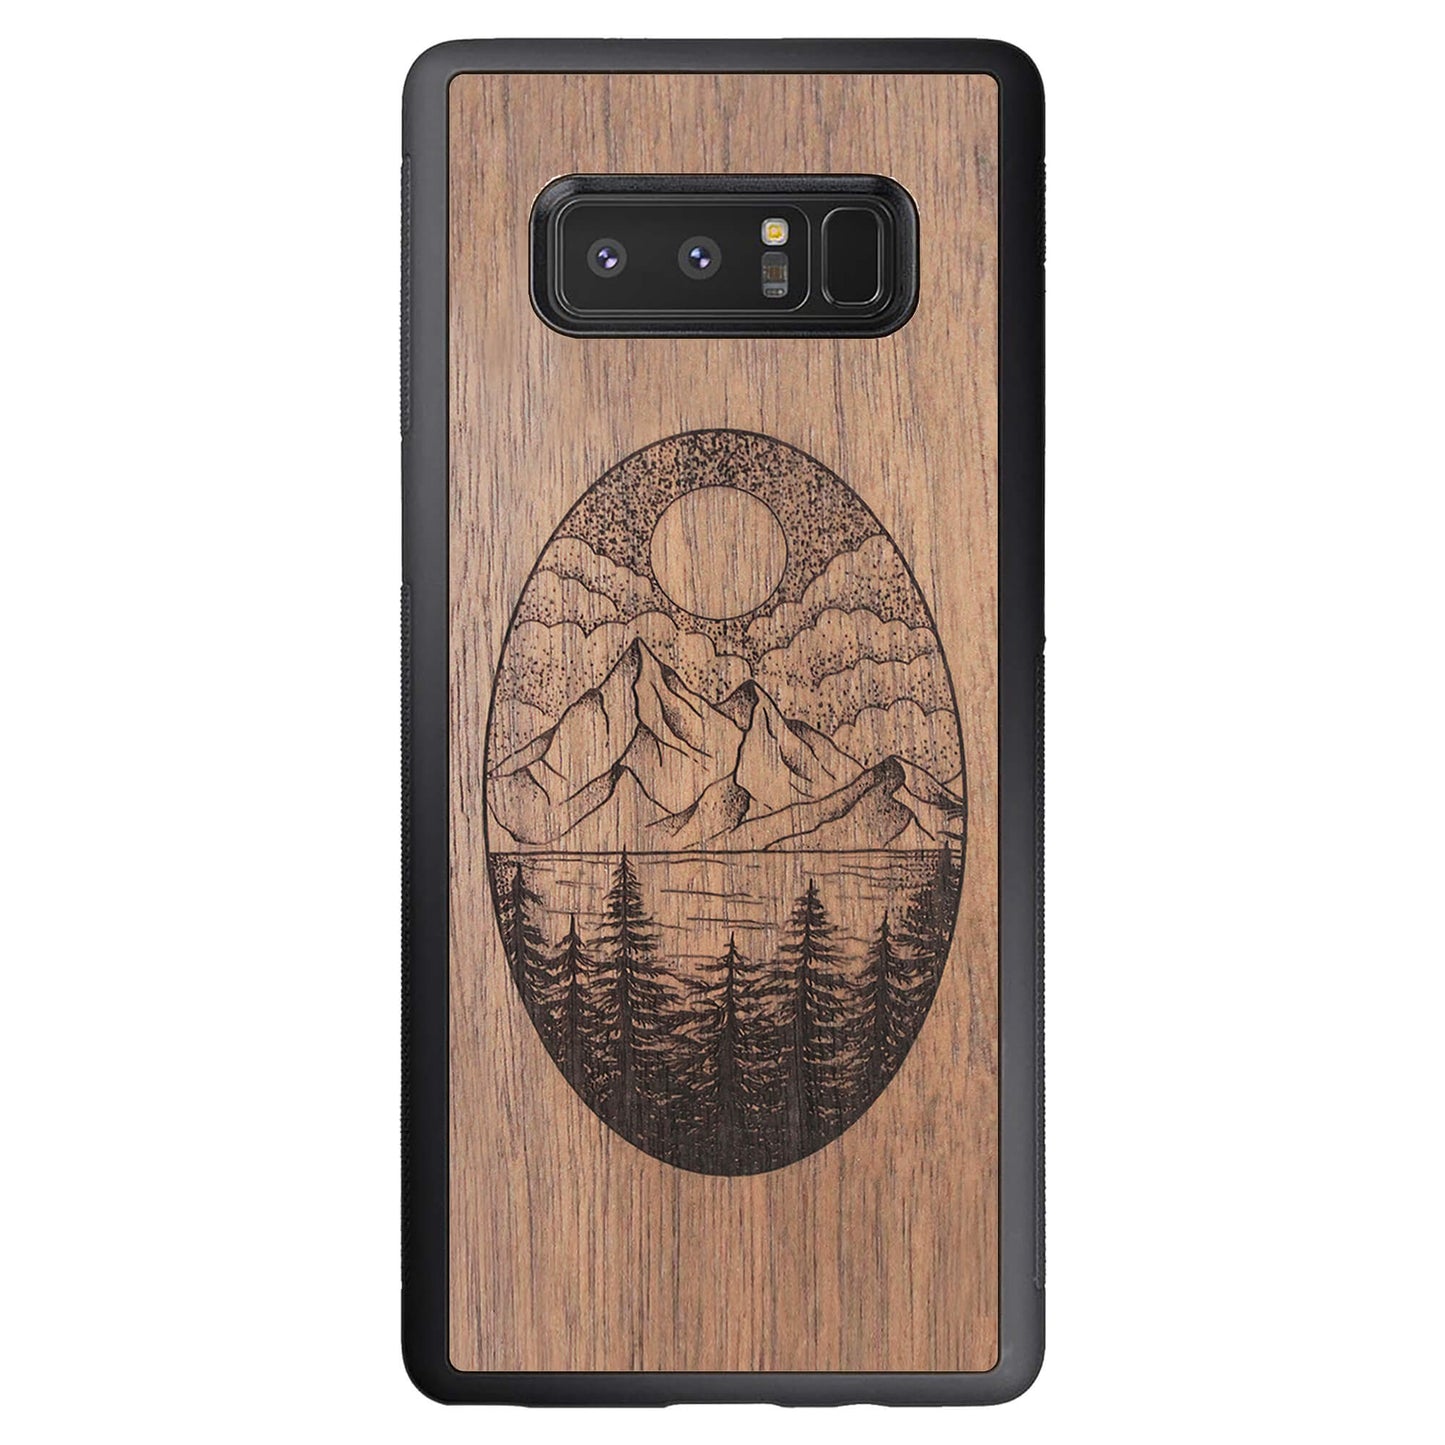 Wooden Case for Samsung Galaxy Note 8 Landscape